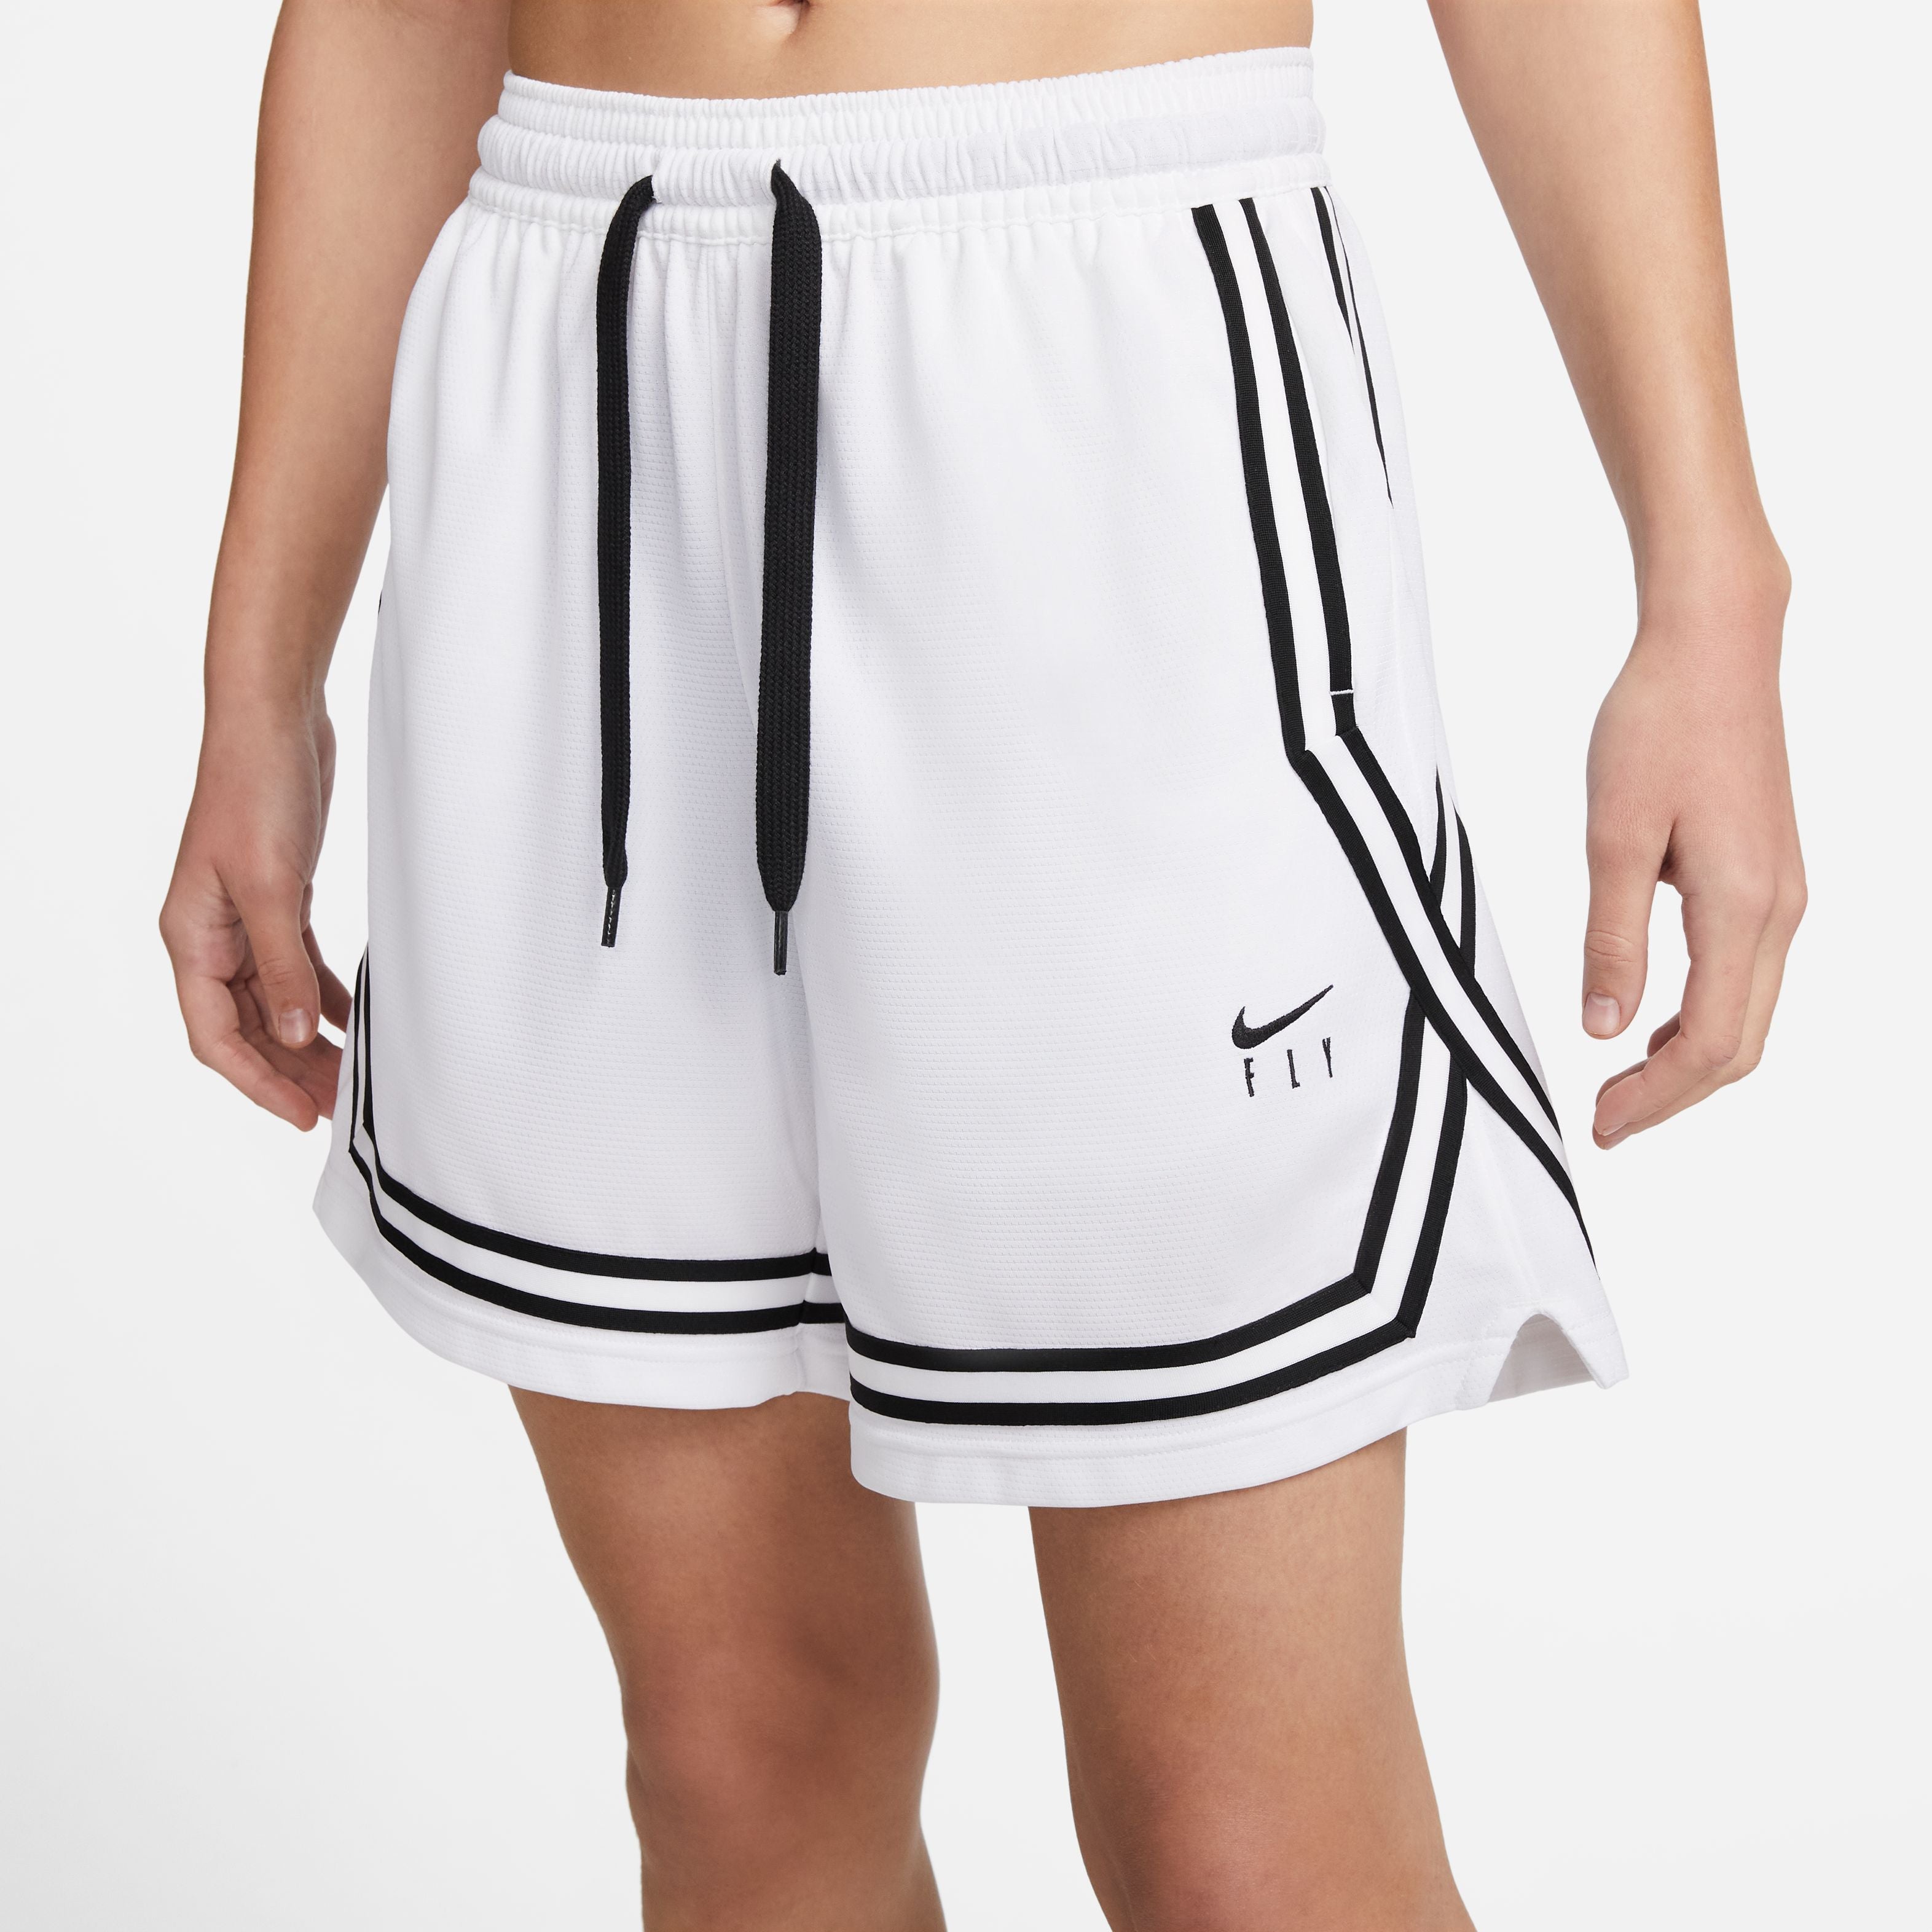 Fly Crossover Basketball Shorts - White/Black – MAKEWAY